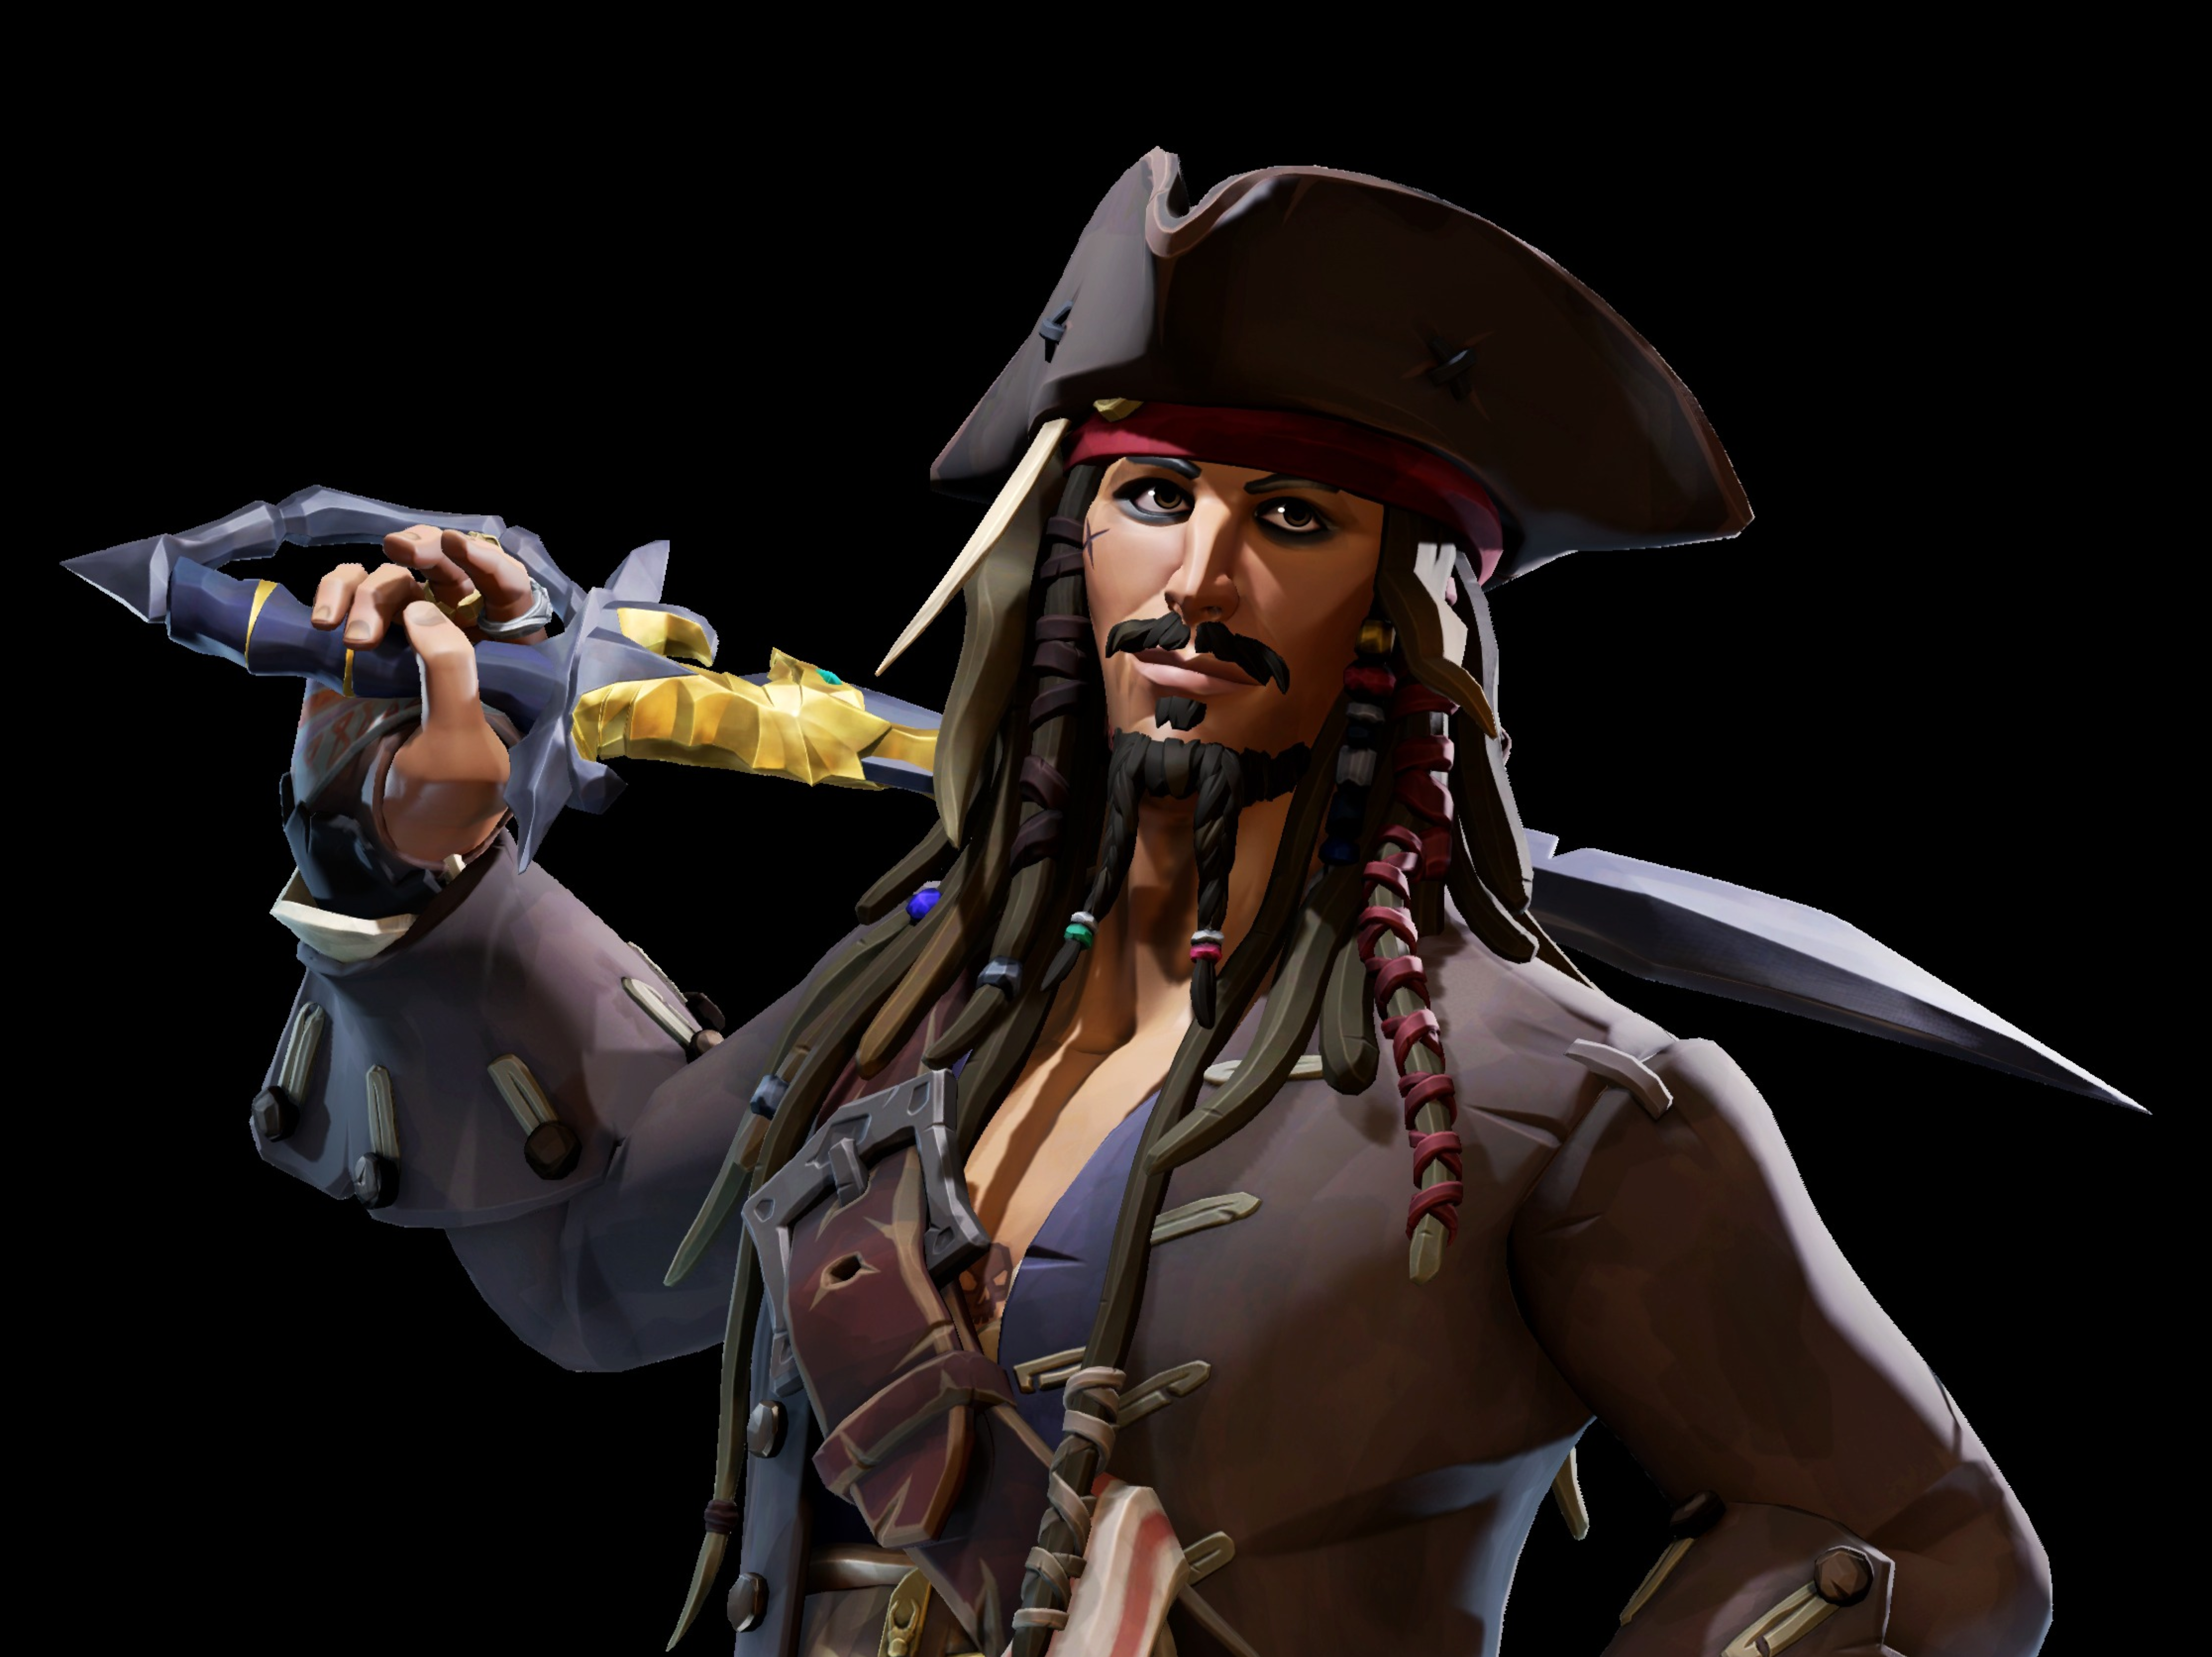 Behind how the ‘Pirates of the Caribbean’ came to Sea of Thieves